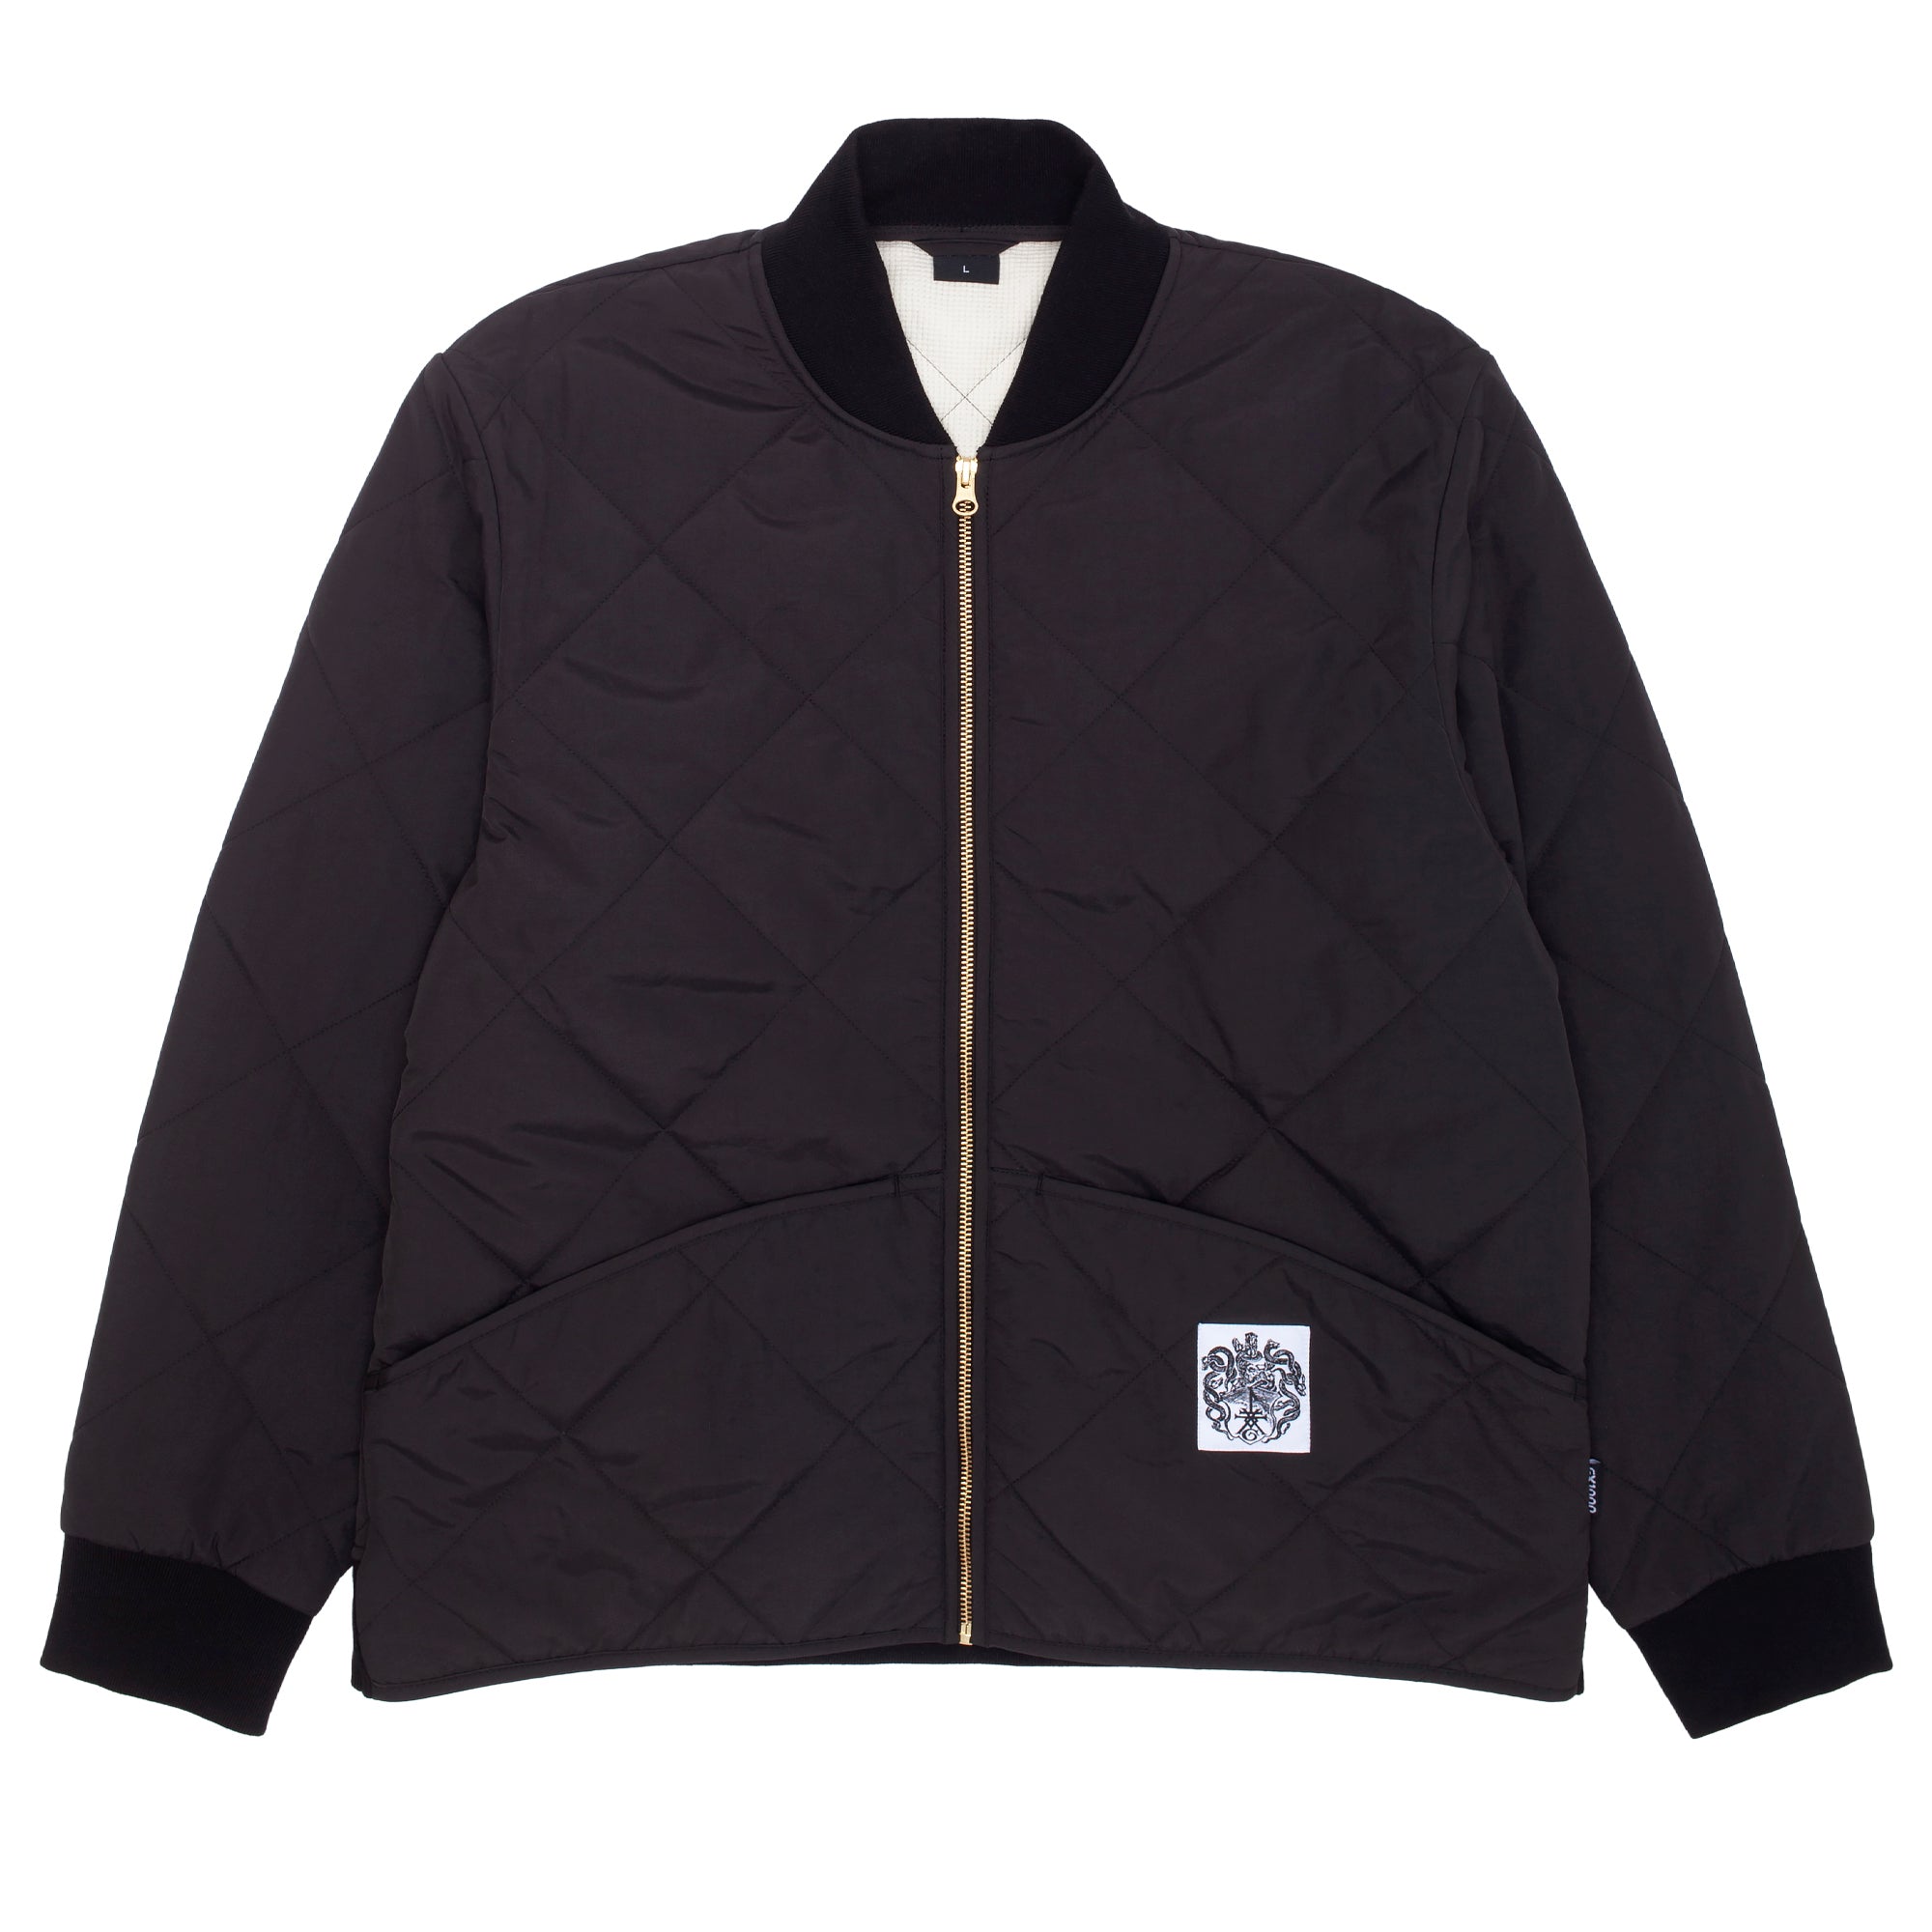 GX1000 - Quilted Mechanic Jacket "Black"